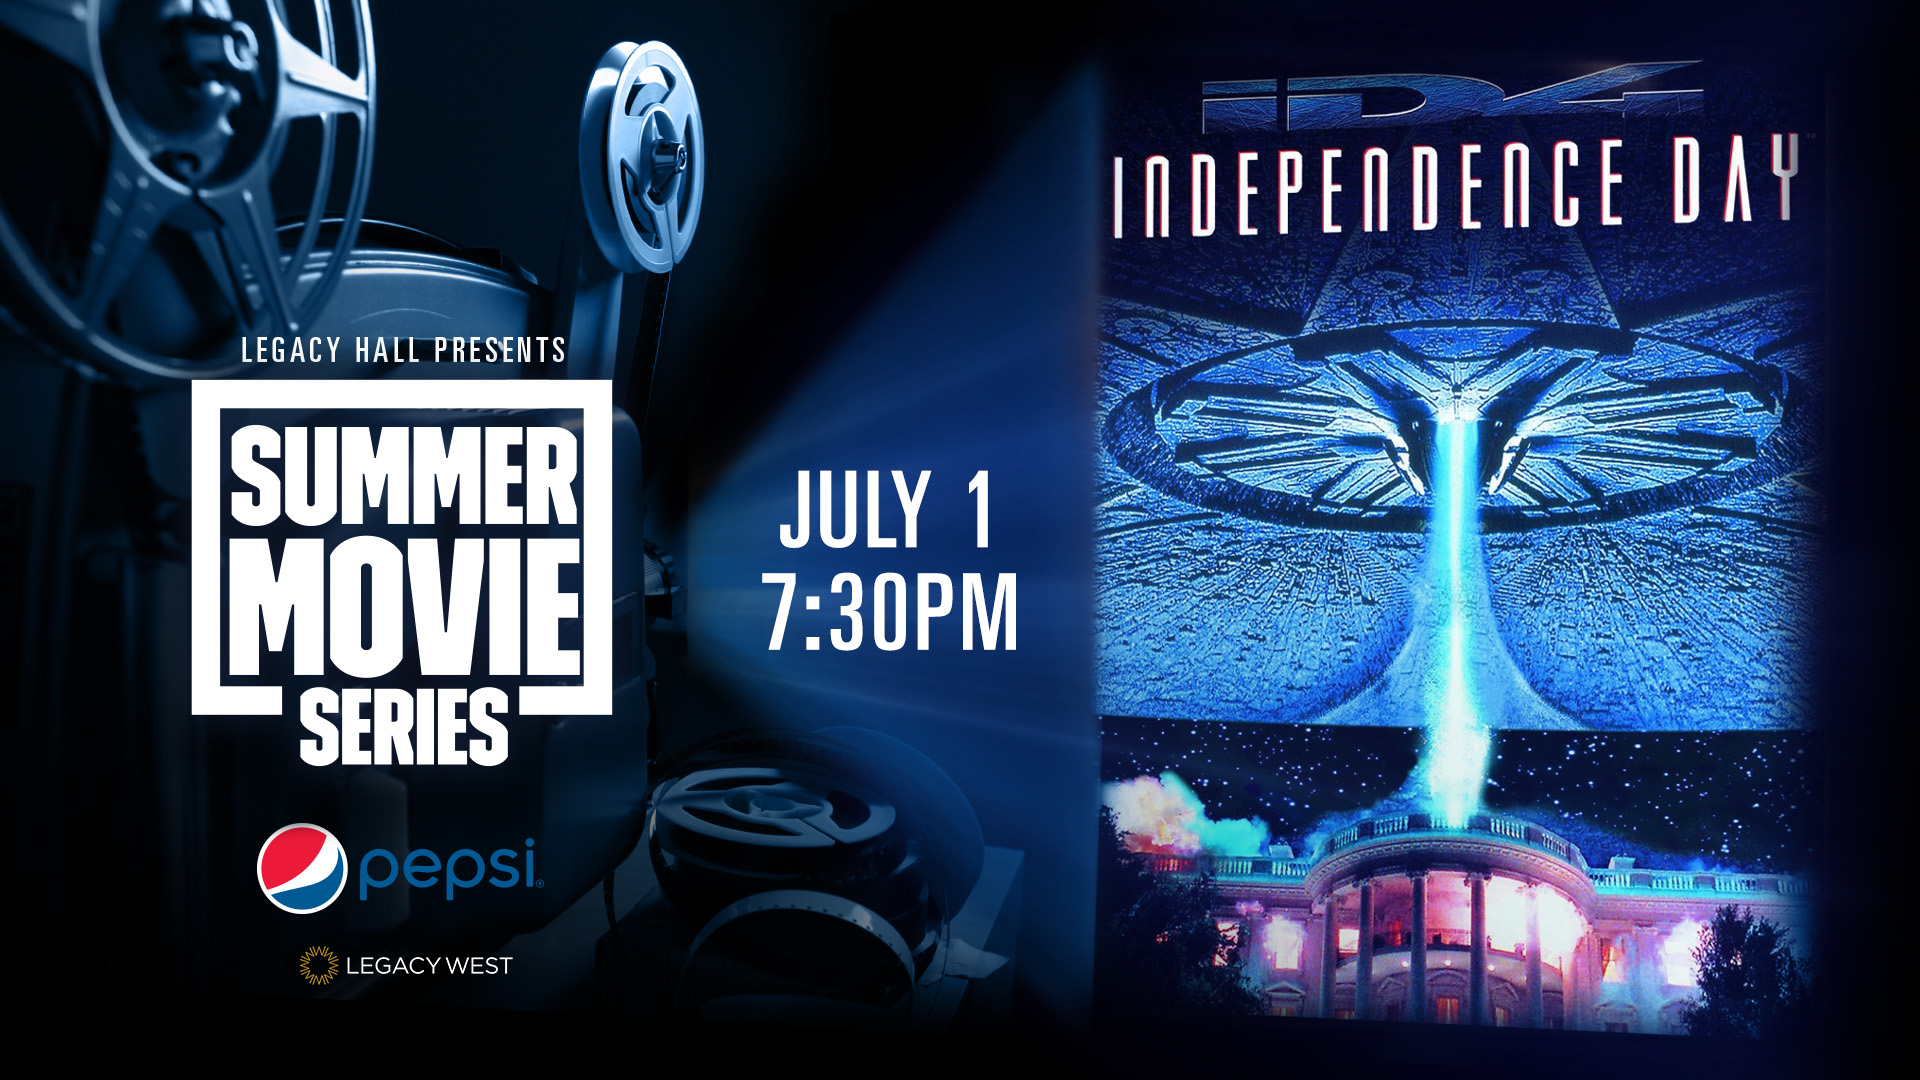 Pepsi Summer Movies Series Independence Day Legacy Hall